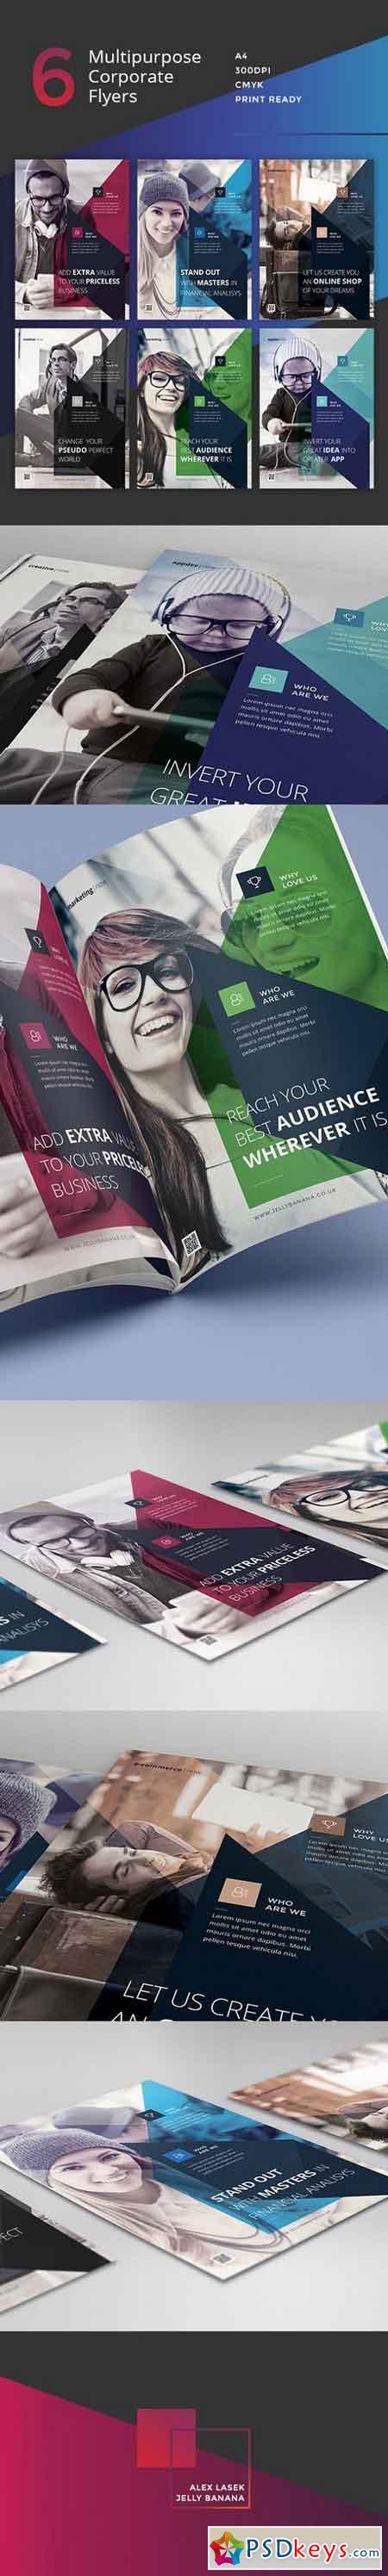 6 Multipurpose Business Flyers, Ads 752602